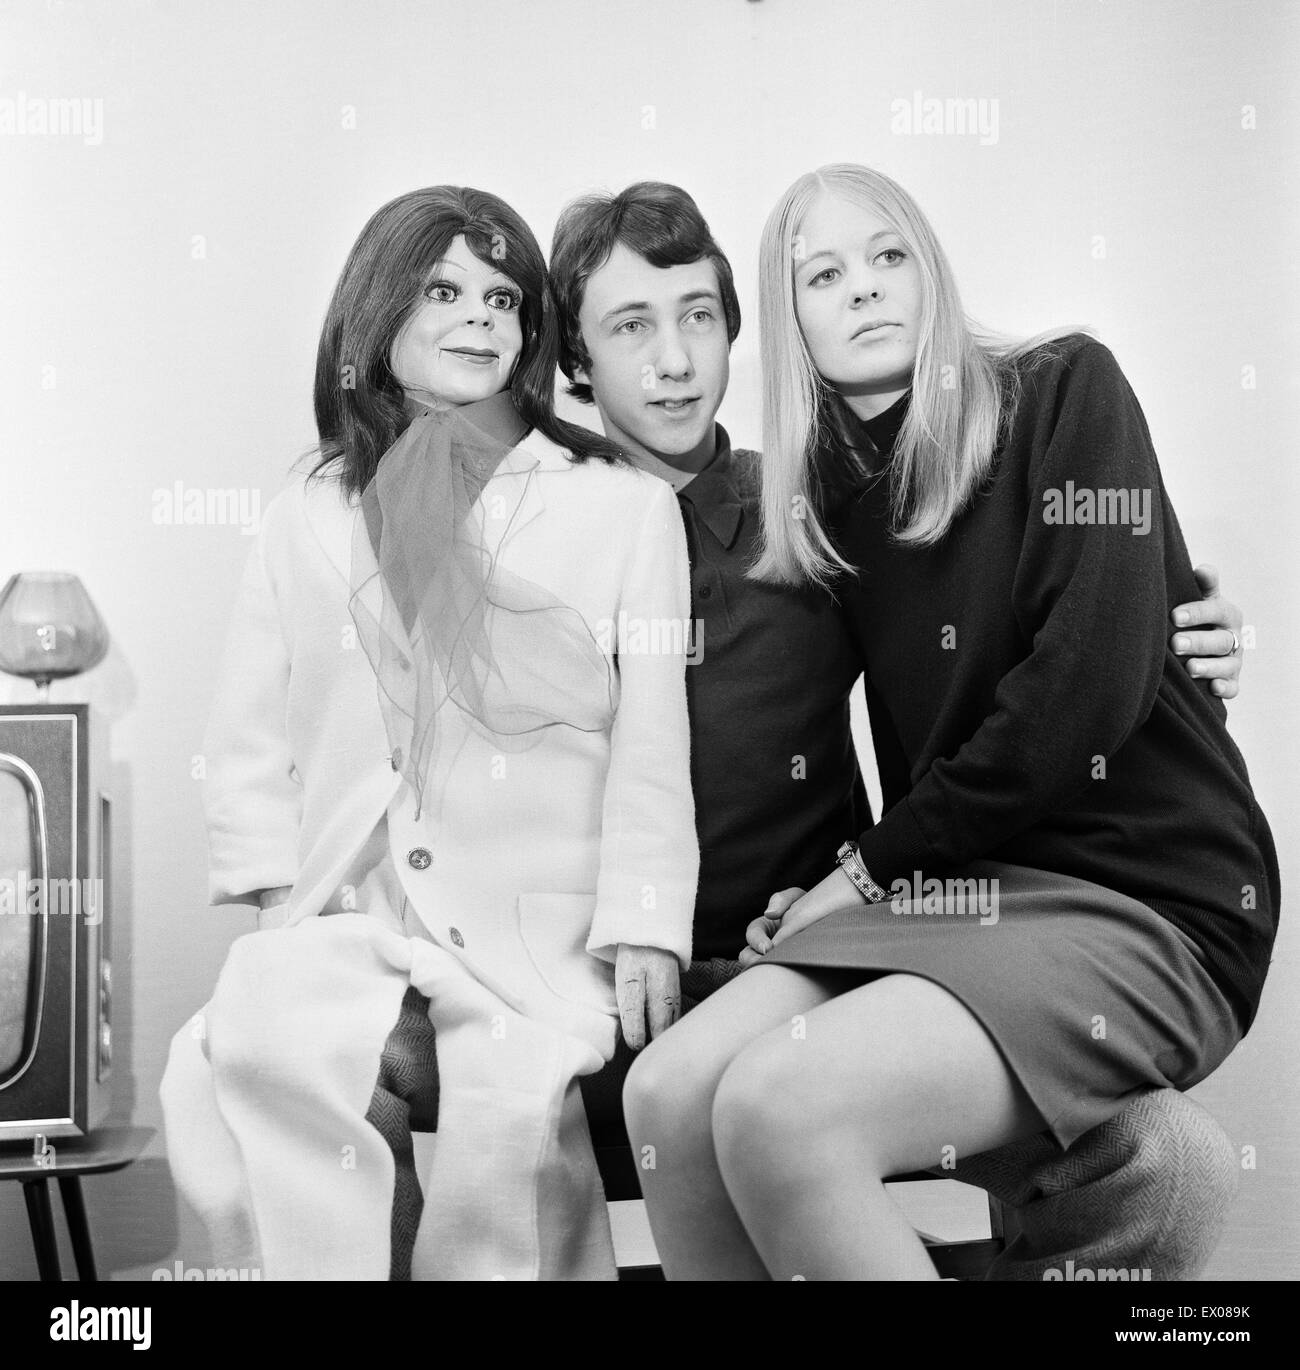 Keith Harris, young ventriloquist aged 20 years old, pictured with dummy called Minnie and girlfriend Jennifer Crompton, in Chester, 26th February 1968. Stock Photo